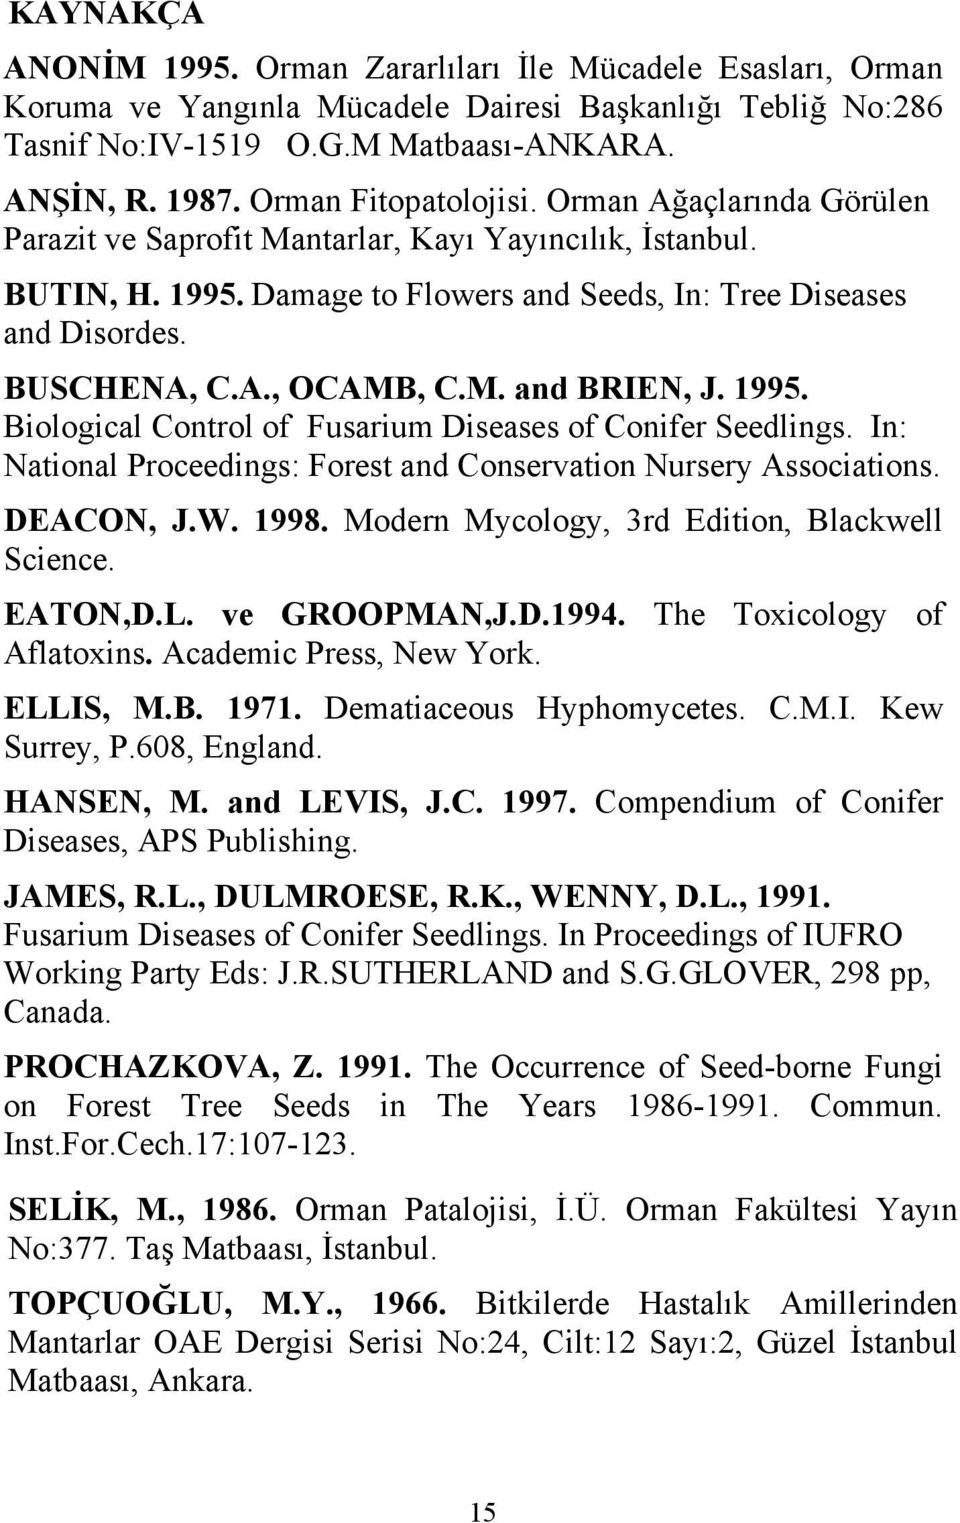 M. and BRIEN, J. 1995. Biological Control of Fusarium Diseases of Conifer Seedlings. In: National Proceedings: Forest and Conservation Nursery Associations. DEACON, J.W. 1998.